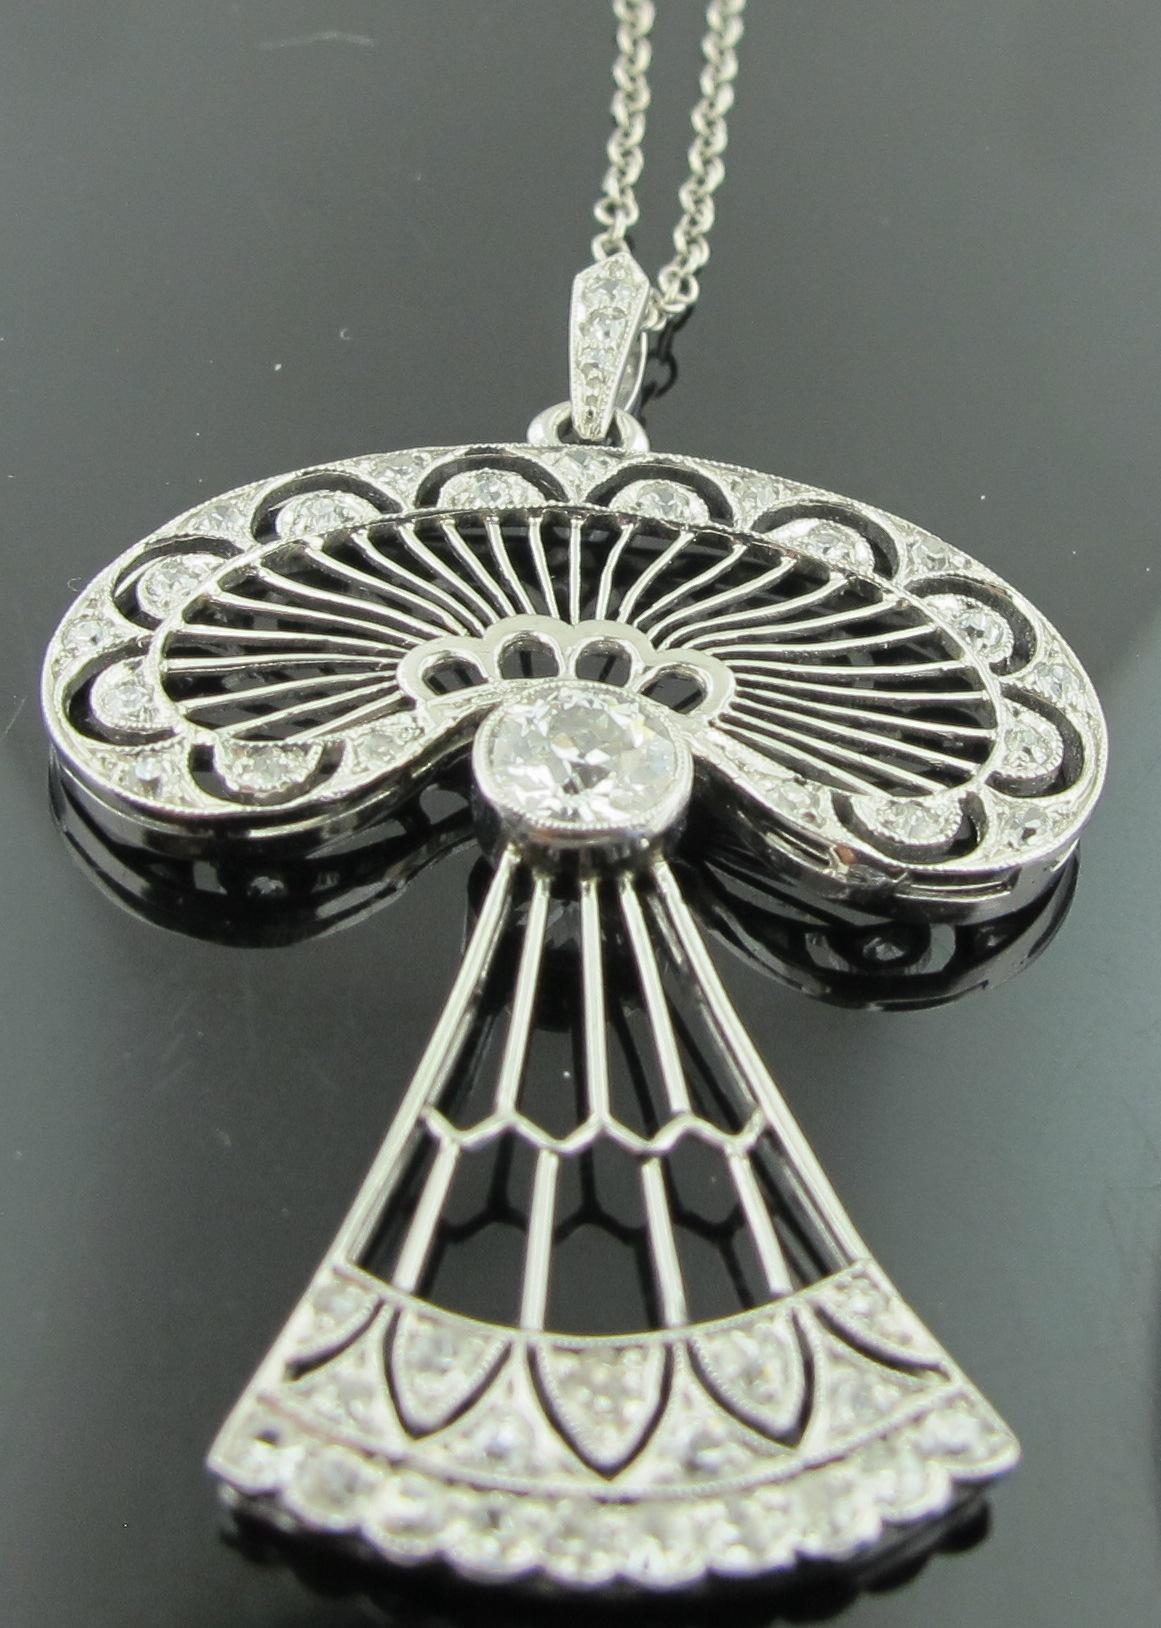 Early 1900's Vintage 14 karat white gold Art Nouveau diamond necklace.  Center diamond is an Old European Cut diamond weighing approximately 0.50 carats with 42 additional diamonds weighing 0.20 carats, with a total diamond weight of 0.80 carats.  